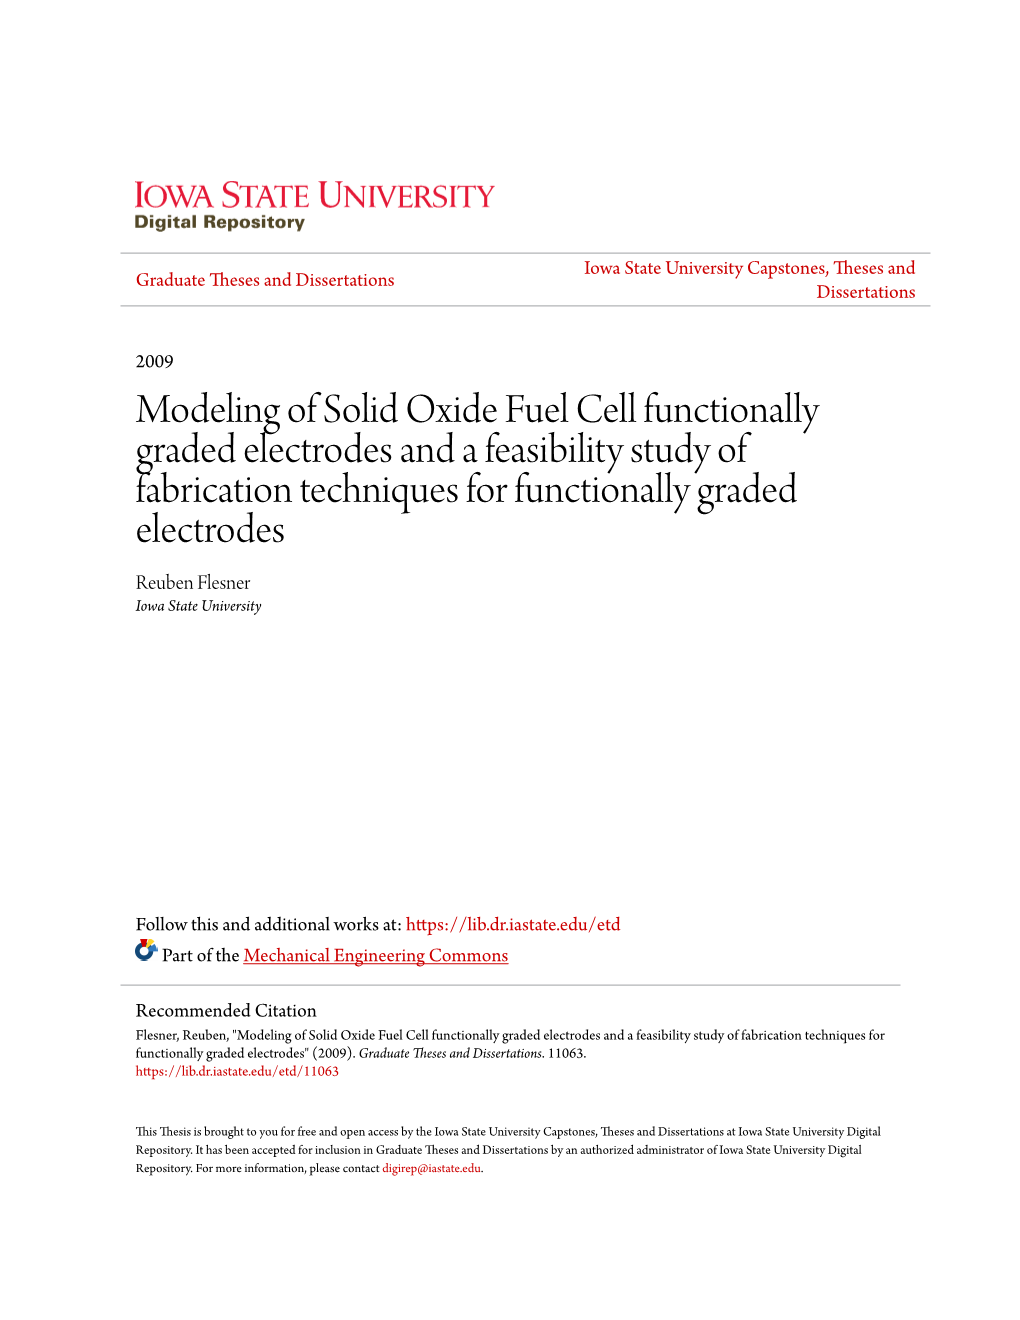 Modeling of Solid Oxide Fuel Cell Functionally Graded Electrodes And